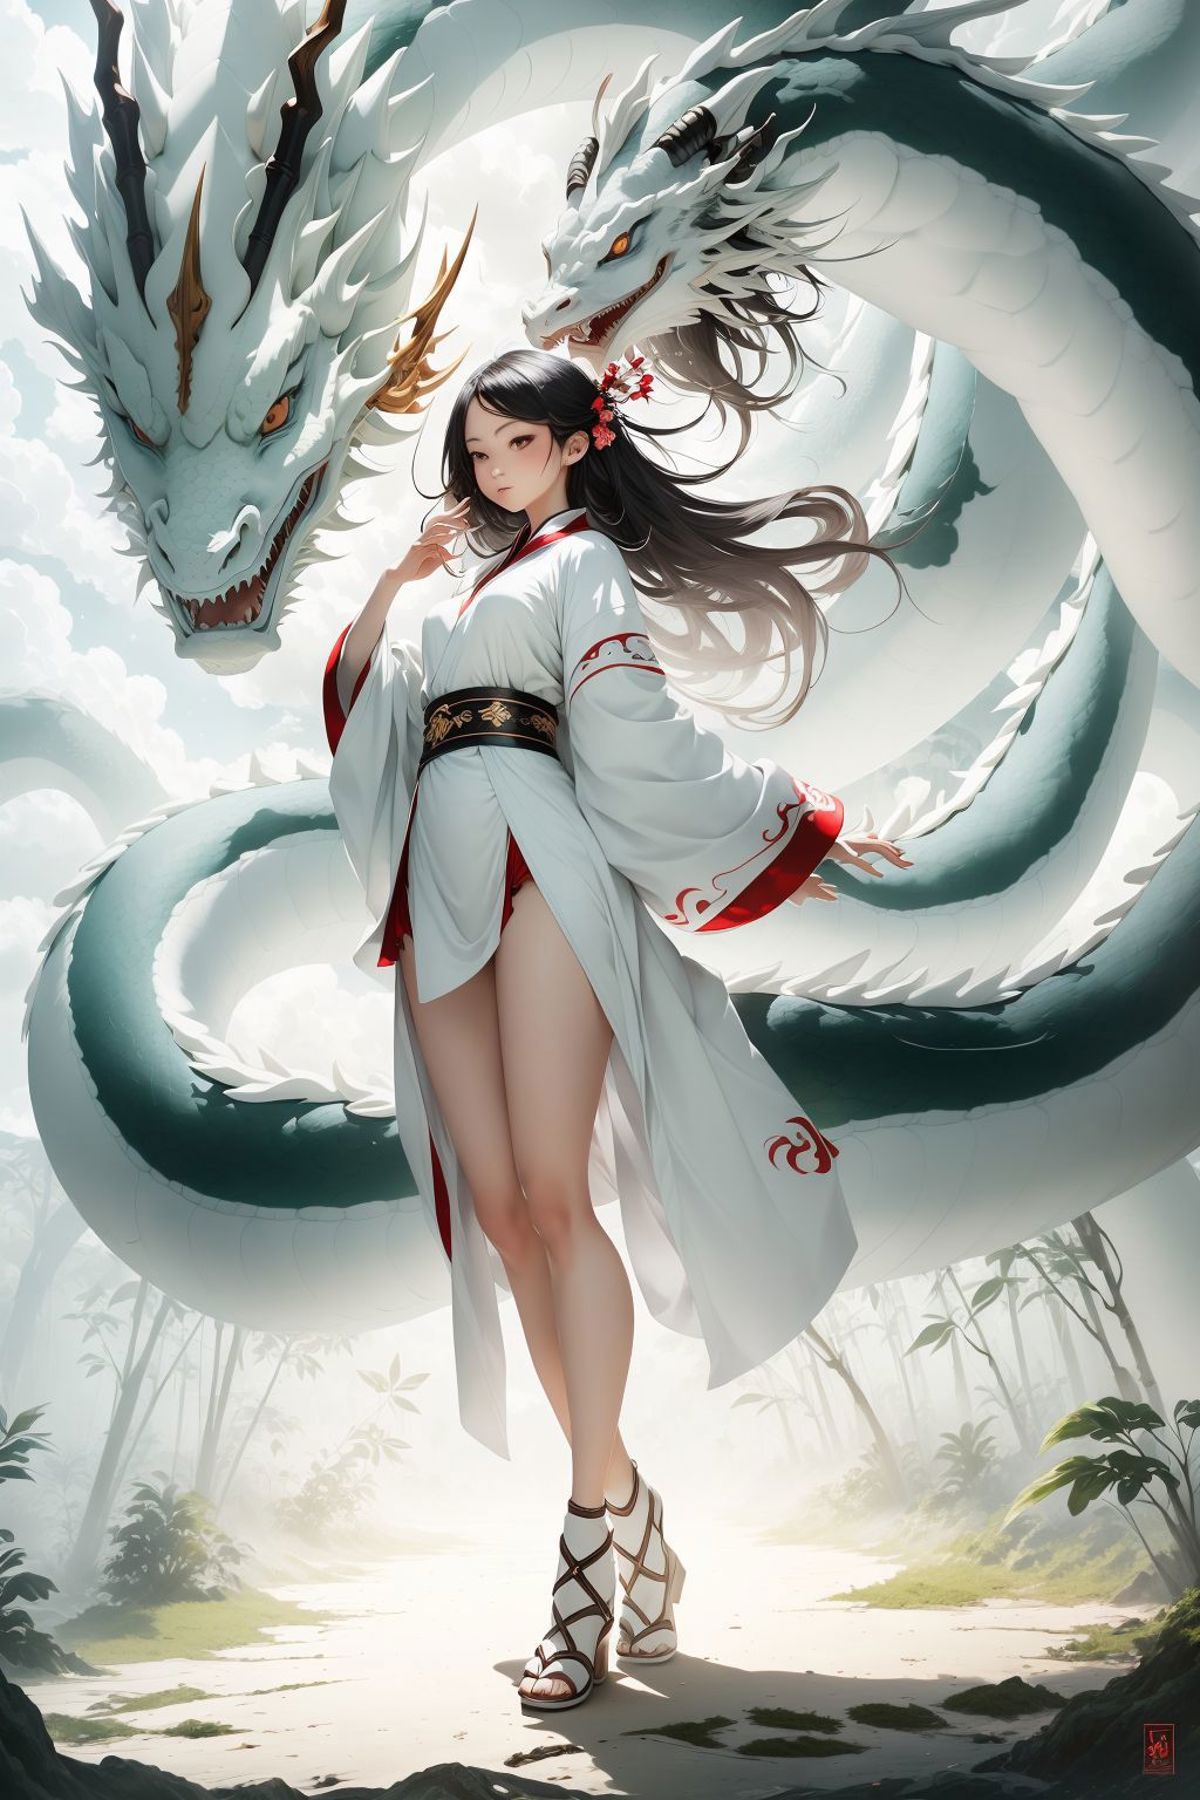 A Japanese girl in a white kimono standing in front of a giant dragon.